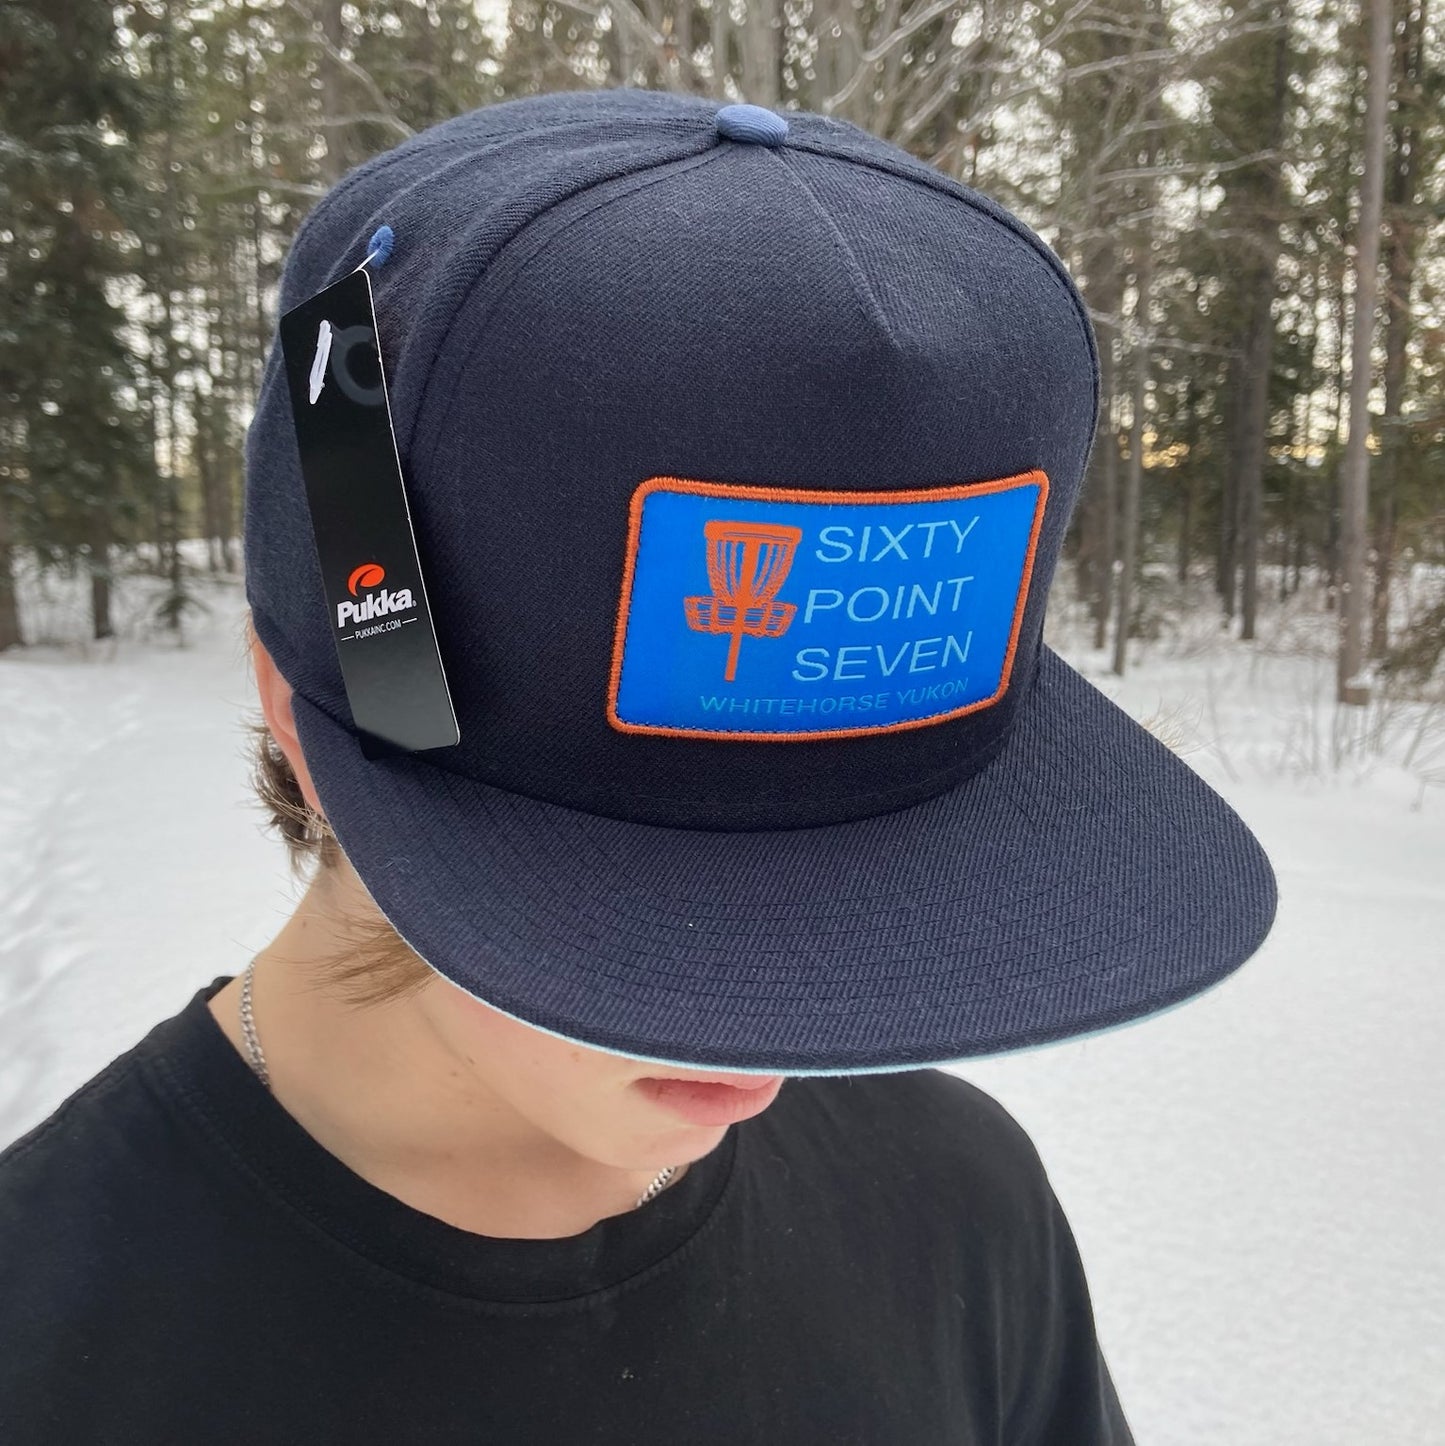 Sixty Point Seven Hat - Navy Blue